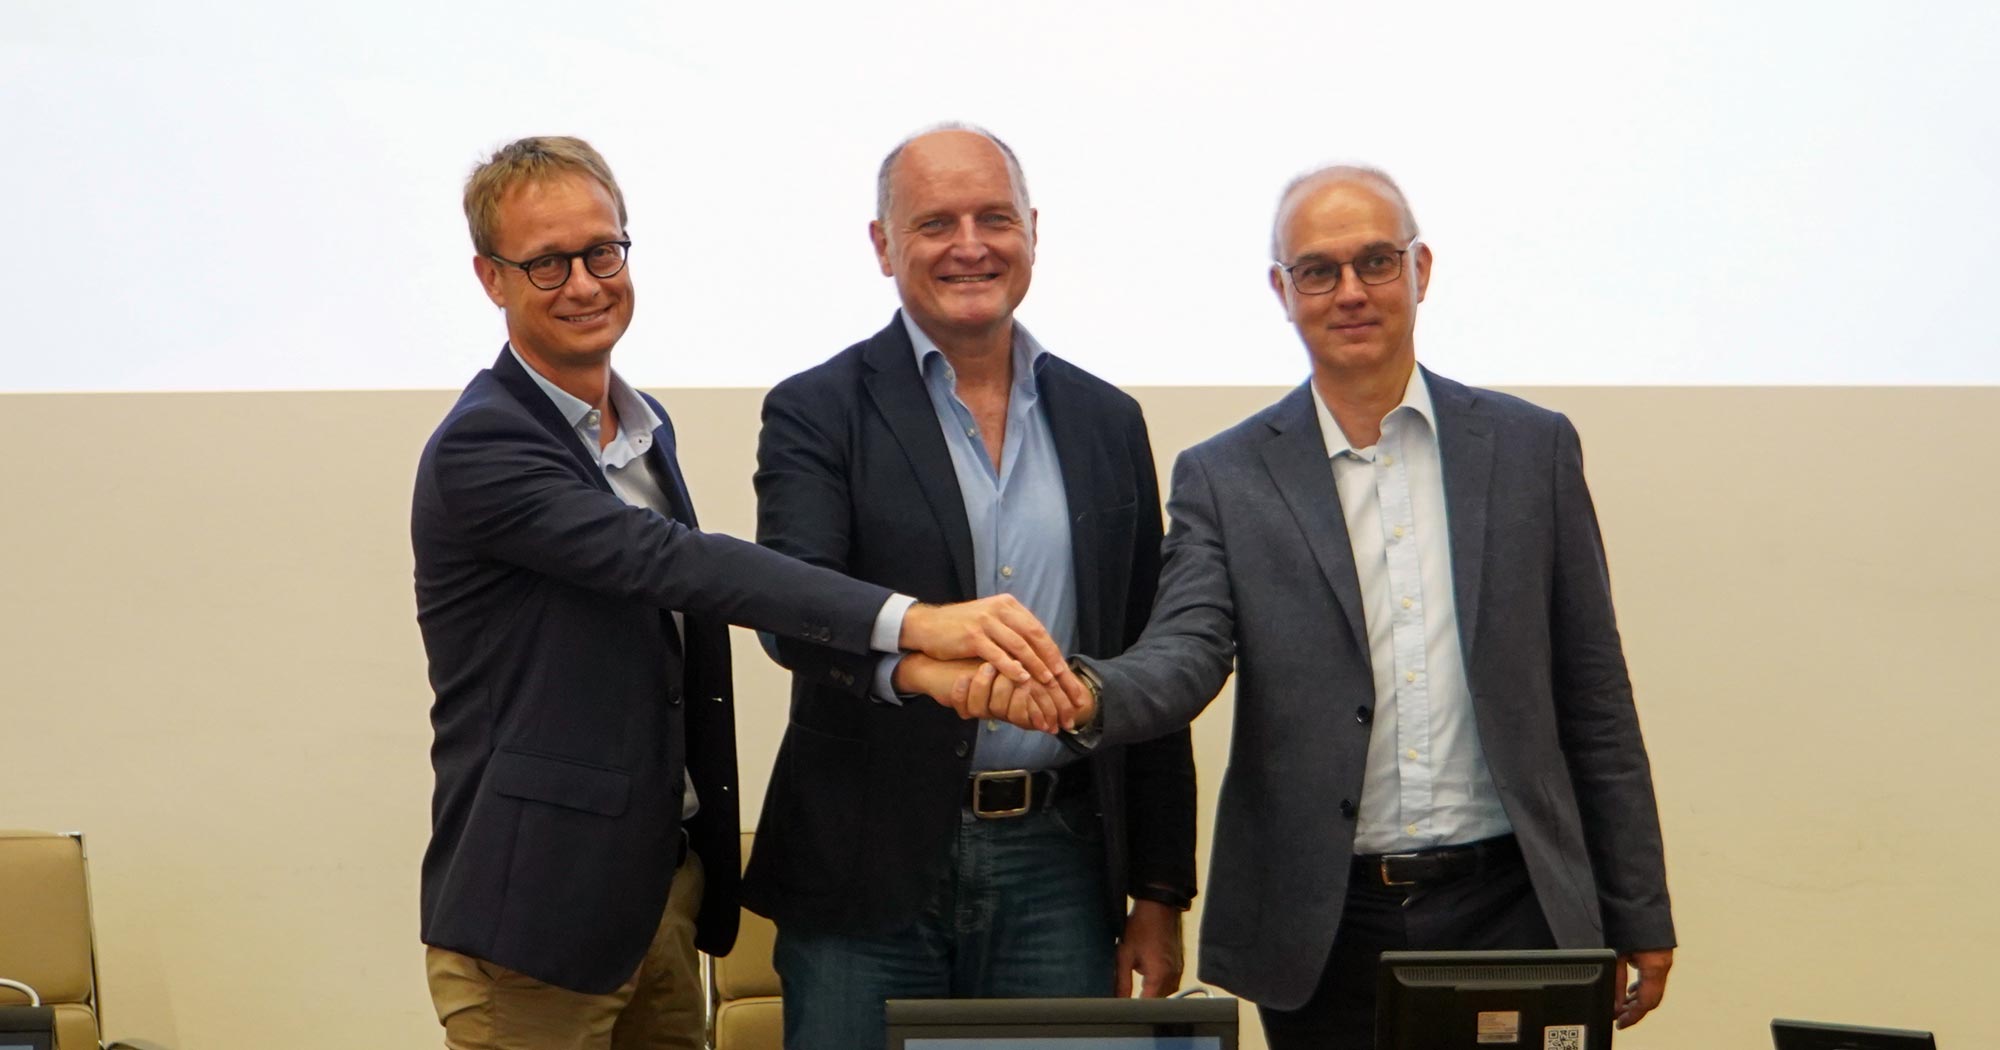 Politecnico di Torino and Wabtec Corp. Announce a Strategic Partnership to Promote Research, Innovation, and Training in Rail Transportation